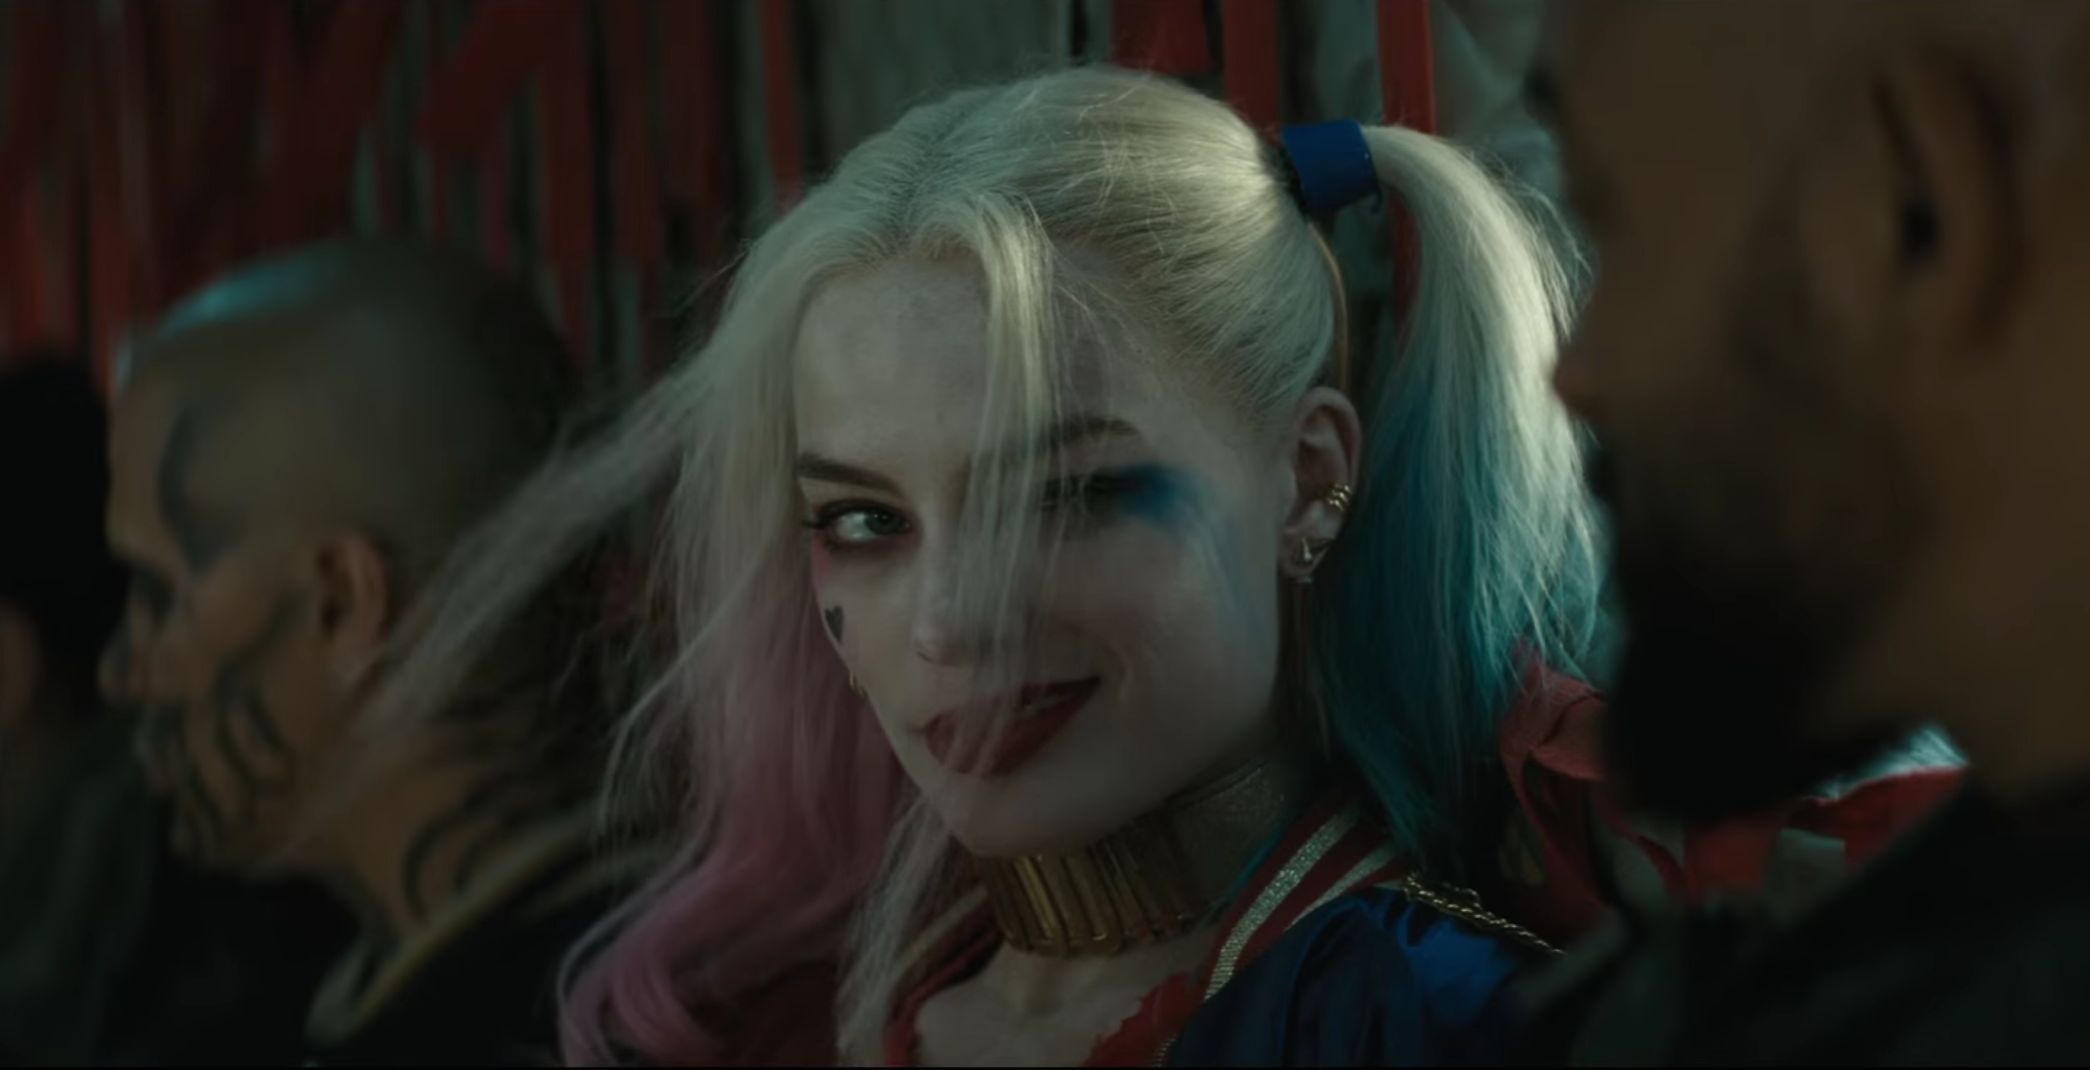 harley quinn, movie, suicide squad, margot robbie, two toned hair, wink